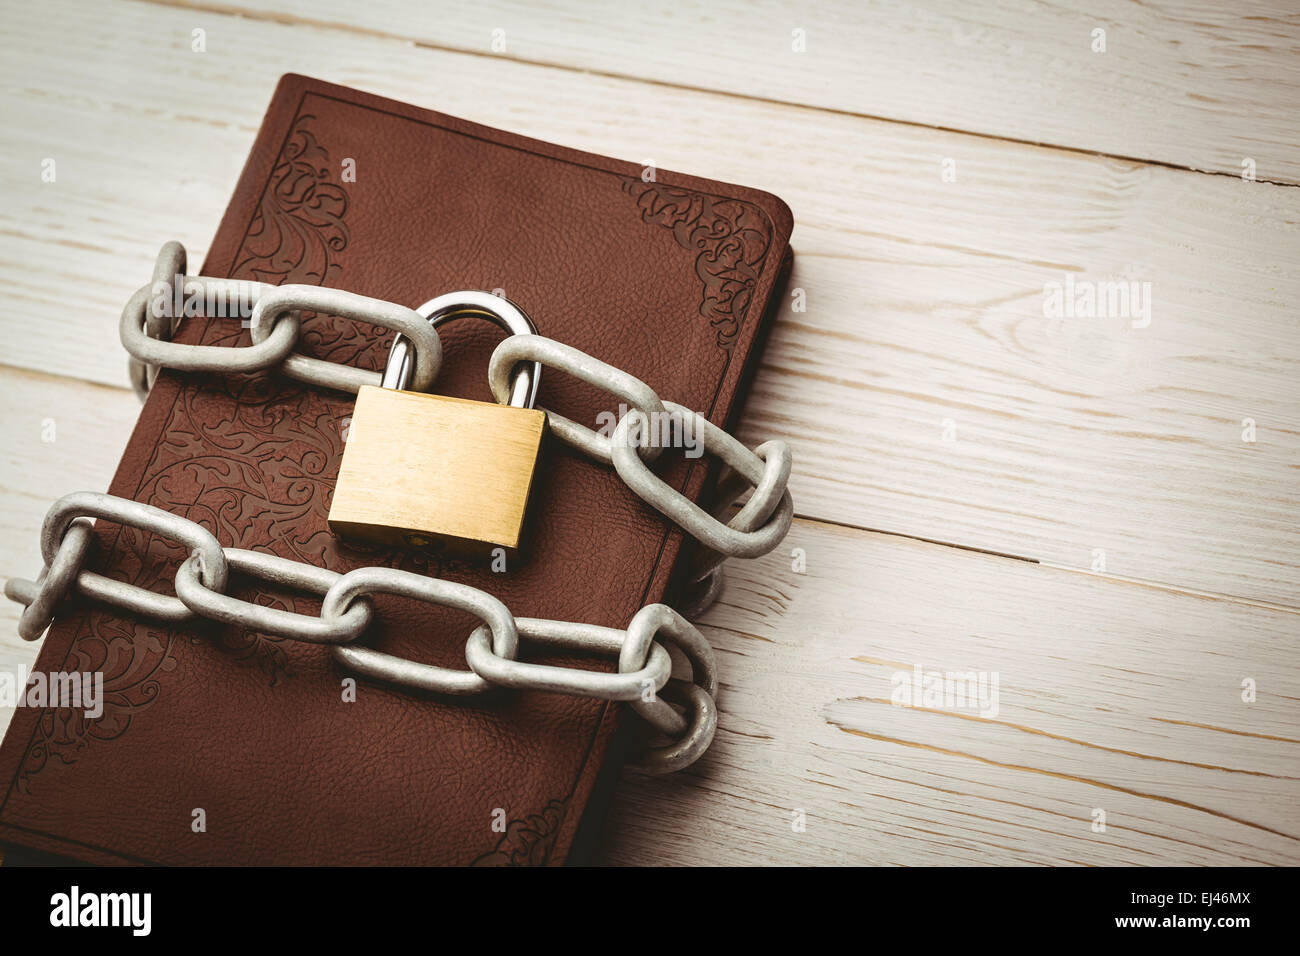 Bible lock High Resolution Stock Photography and Images - Alamy